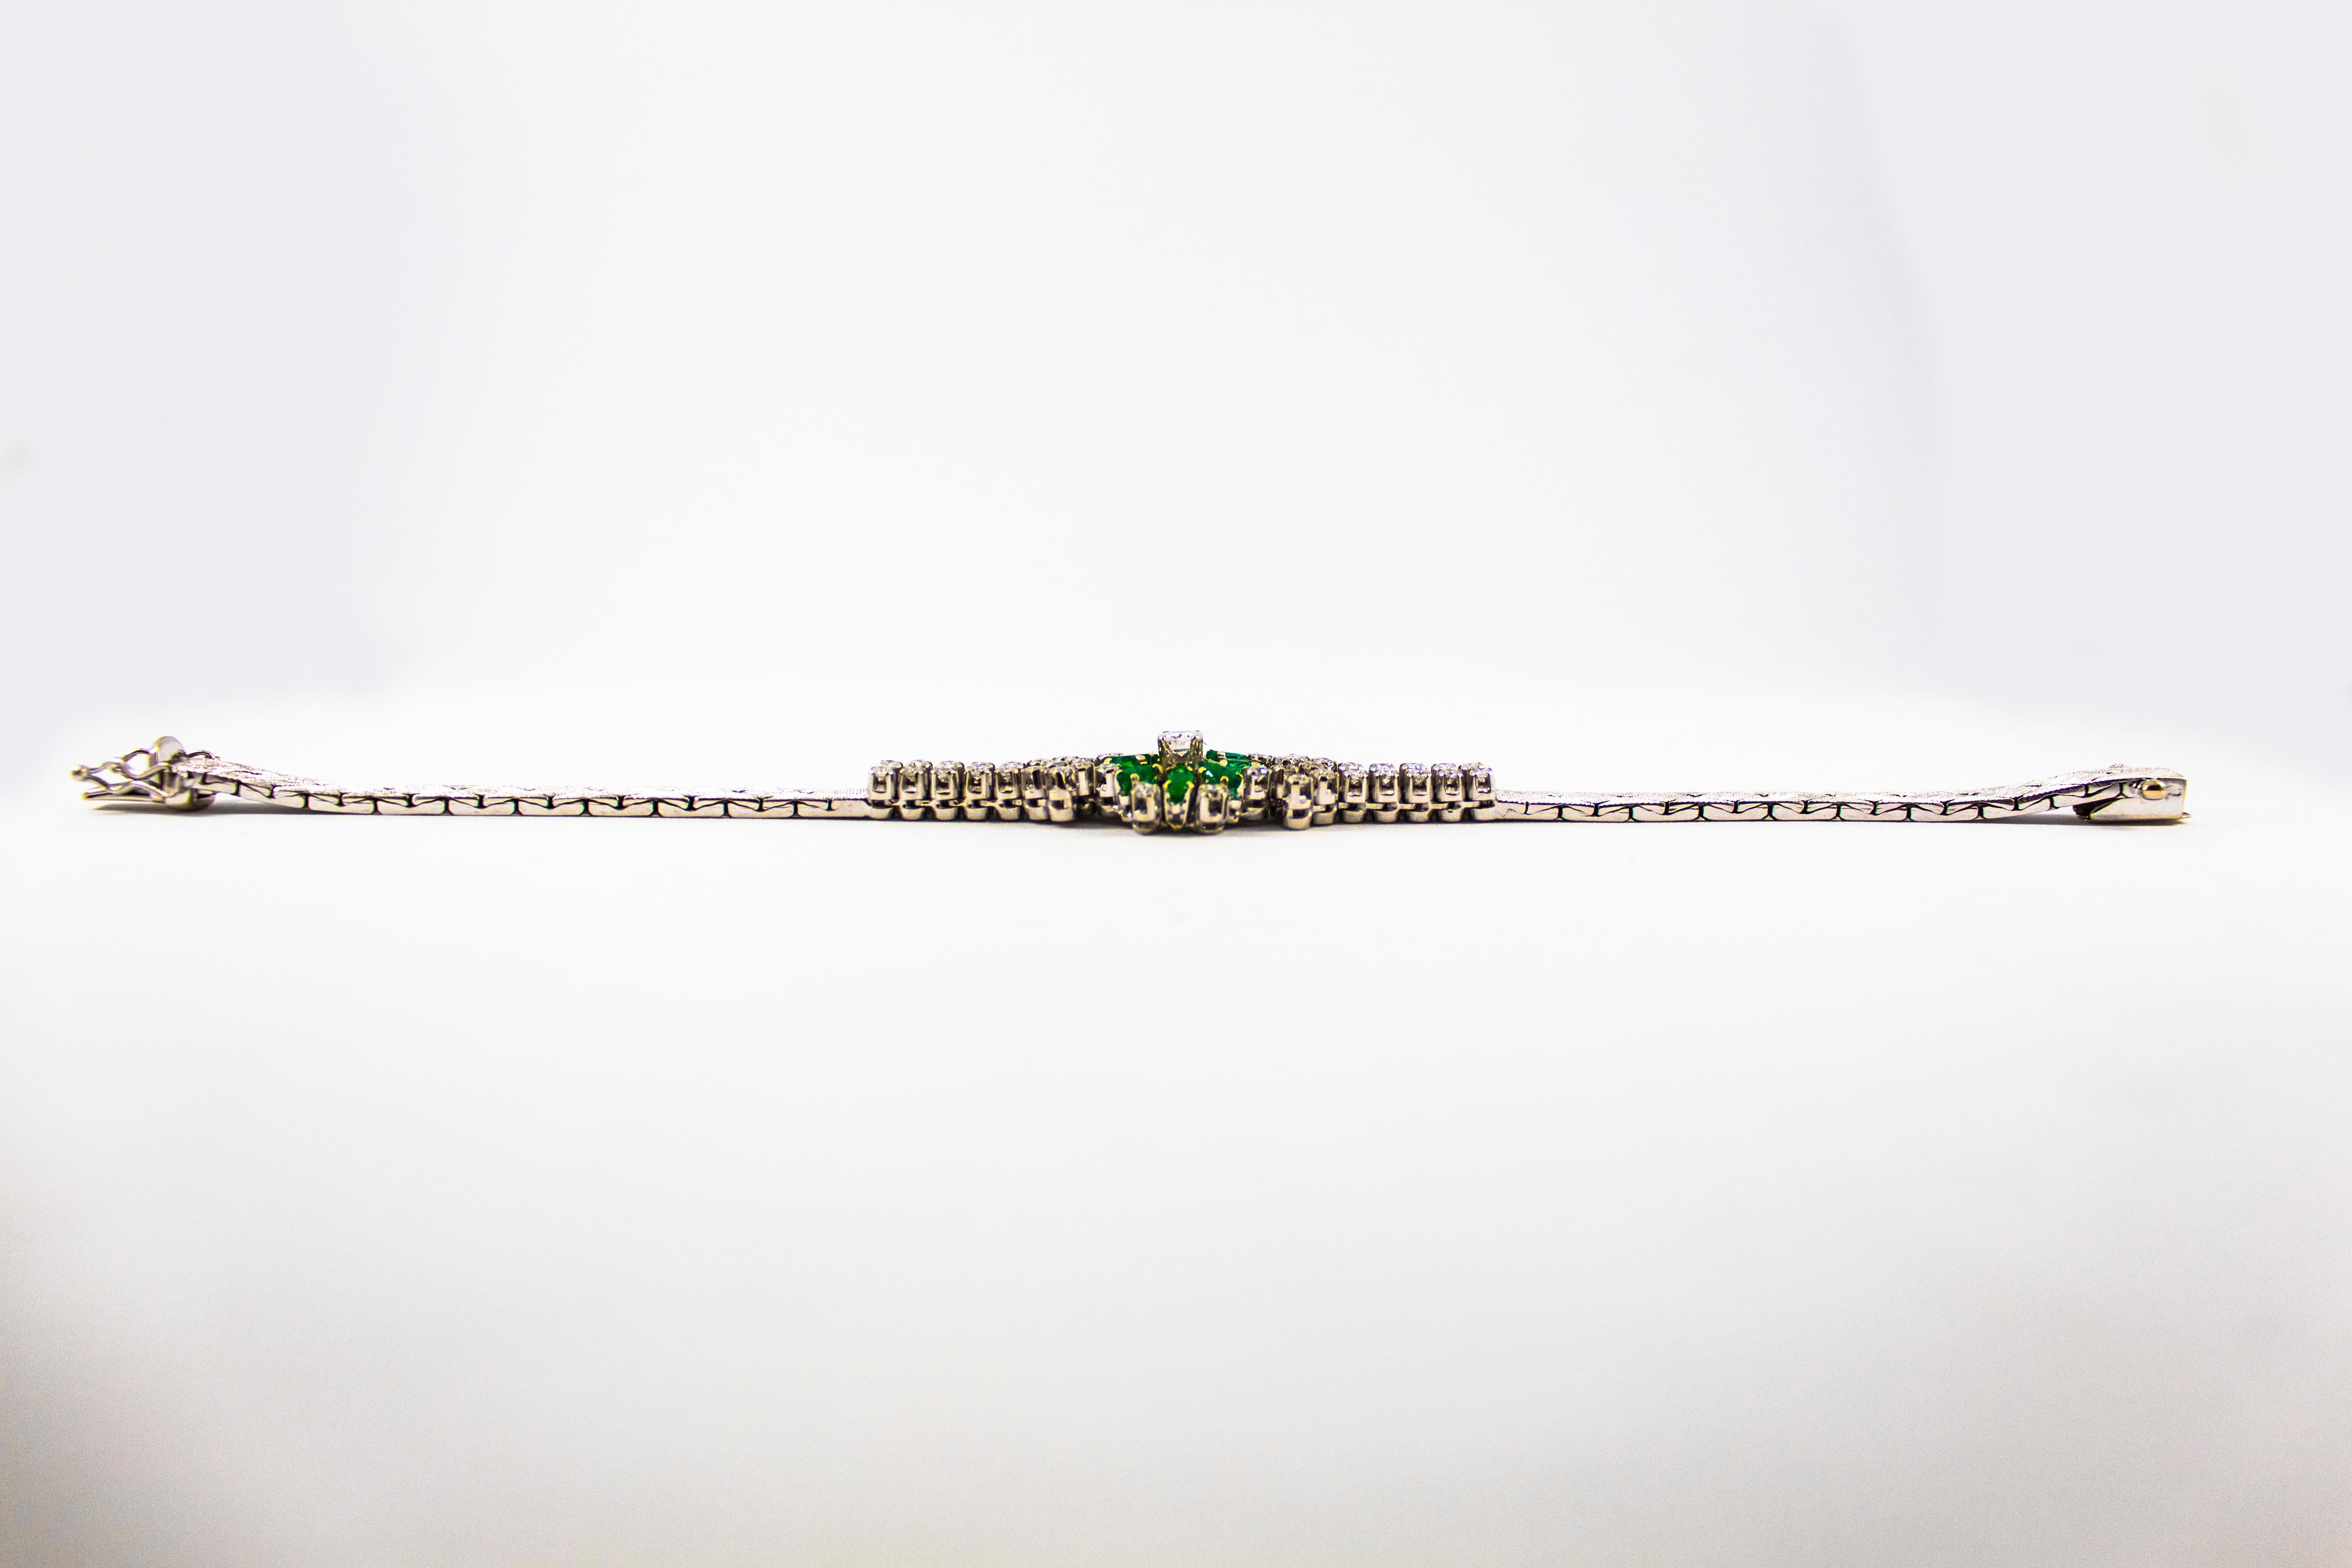 This Bracelet is made of 18K White Gold.
This Bracelet has 1.50 Carats of White Diamonds.
This Bracelet has 1.60 Carats of Emeralds.
We're a workshop so every piece is handmade, customizable and resizable.